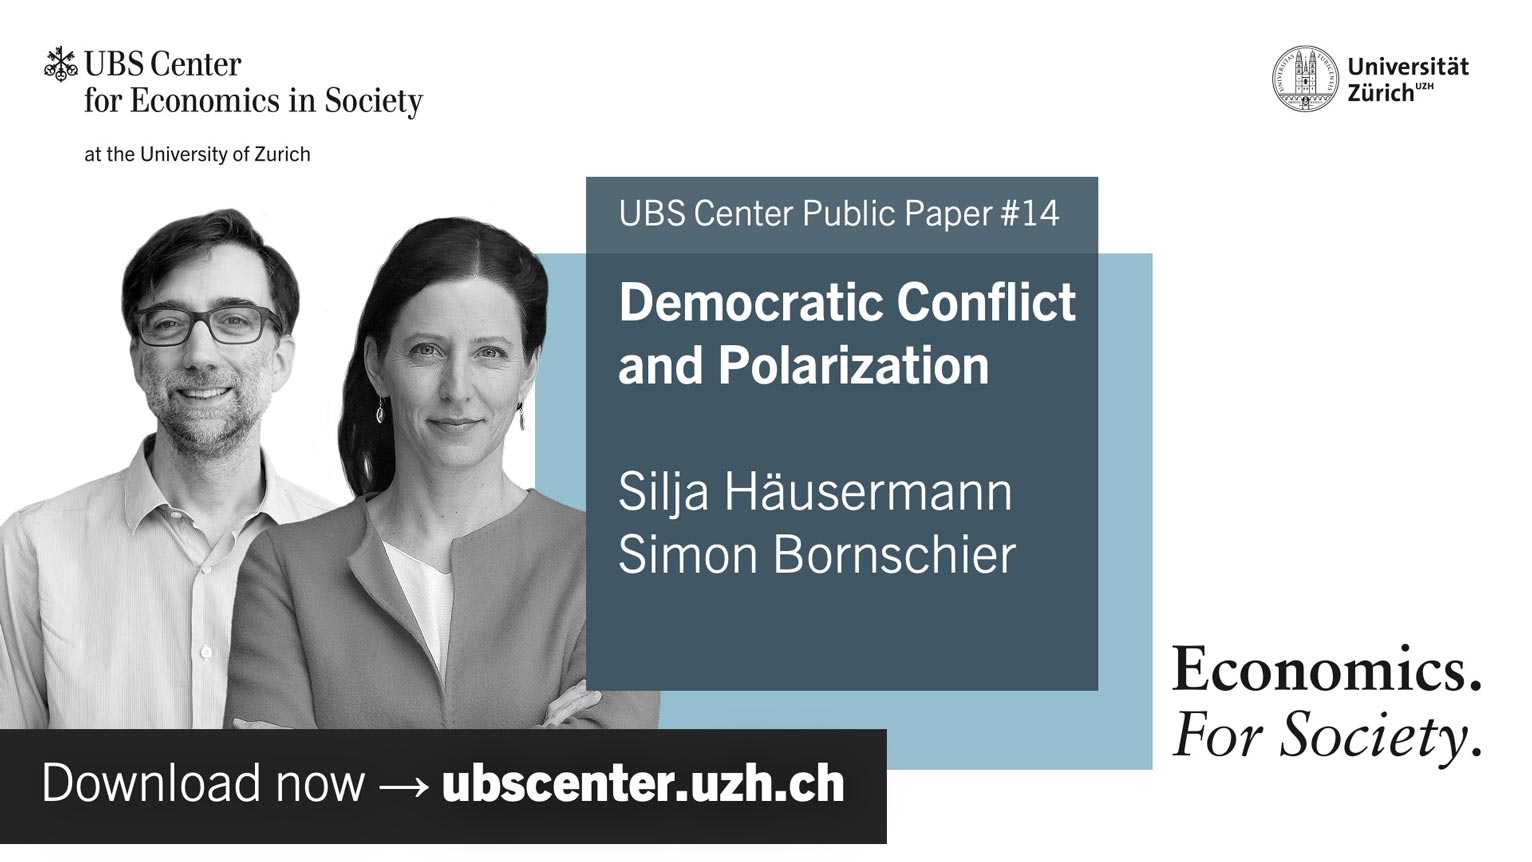 Public Paper No. 14 by Silja Häusermann, Professor at the Department of Political Science, University of Zurich, and Dr. Simon Bornschier, Director of the Research area Political Sociology, University of Zurich